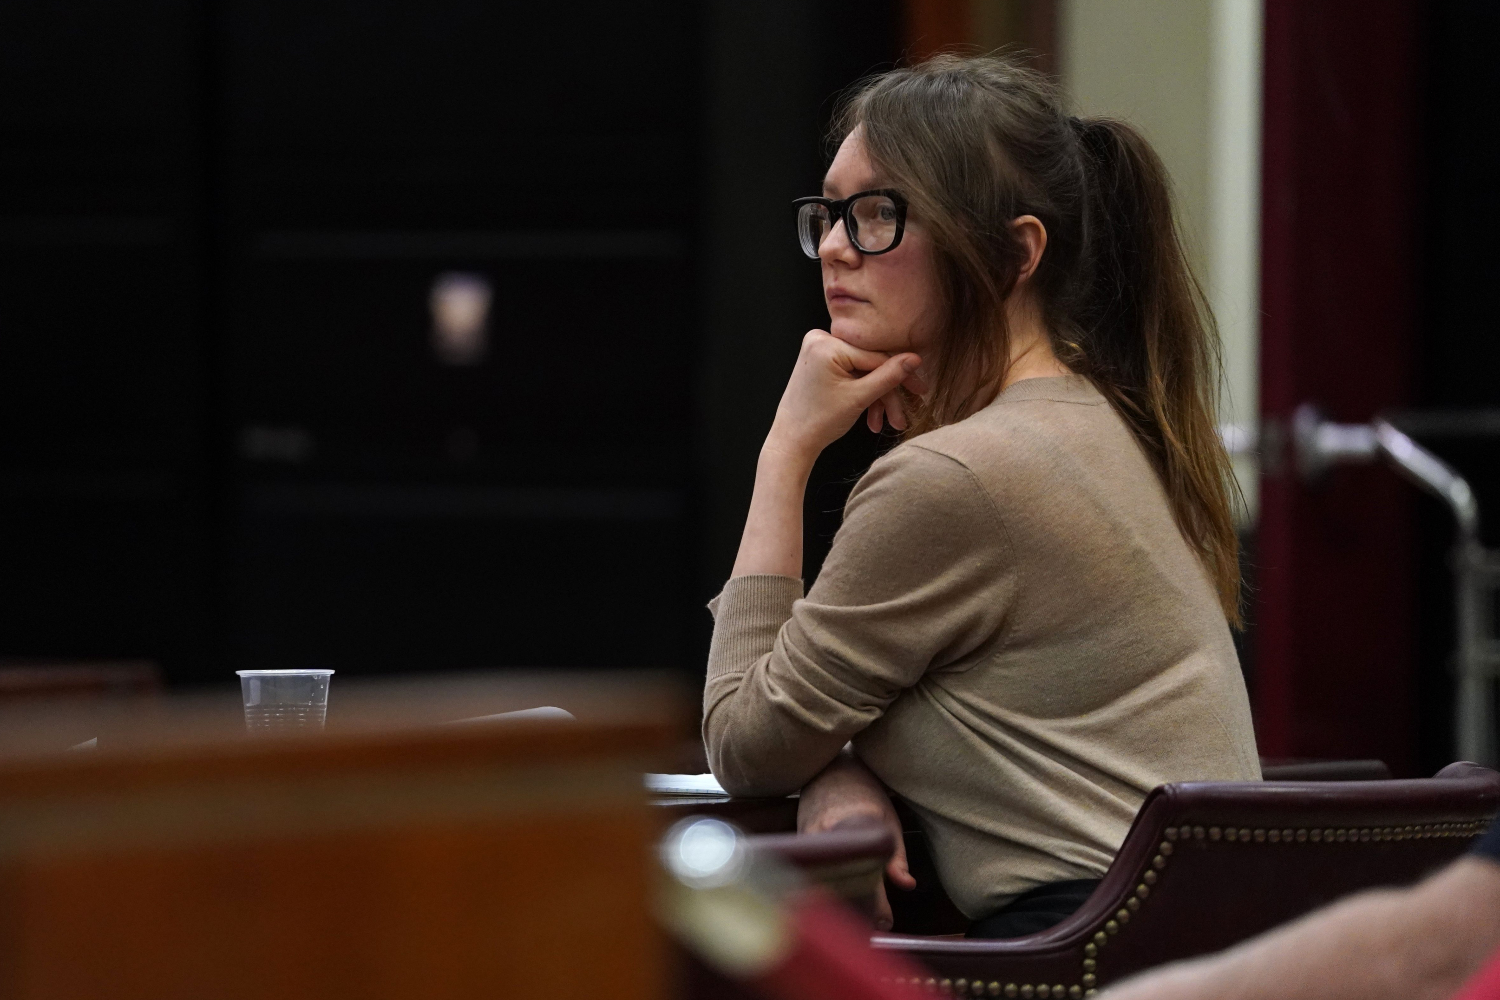 anna delvey sits in a court room resting her chin on her hand